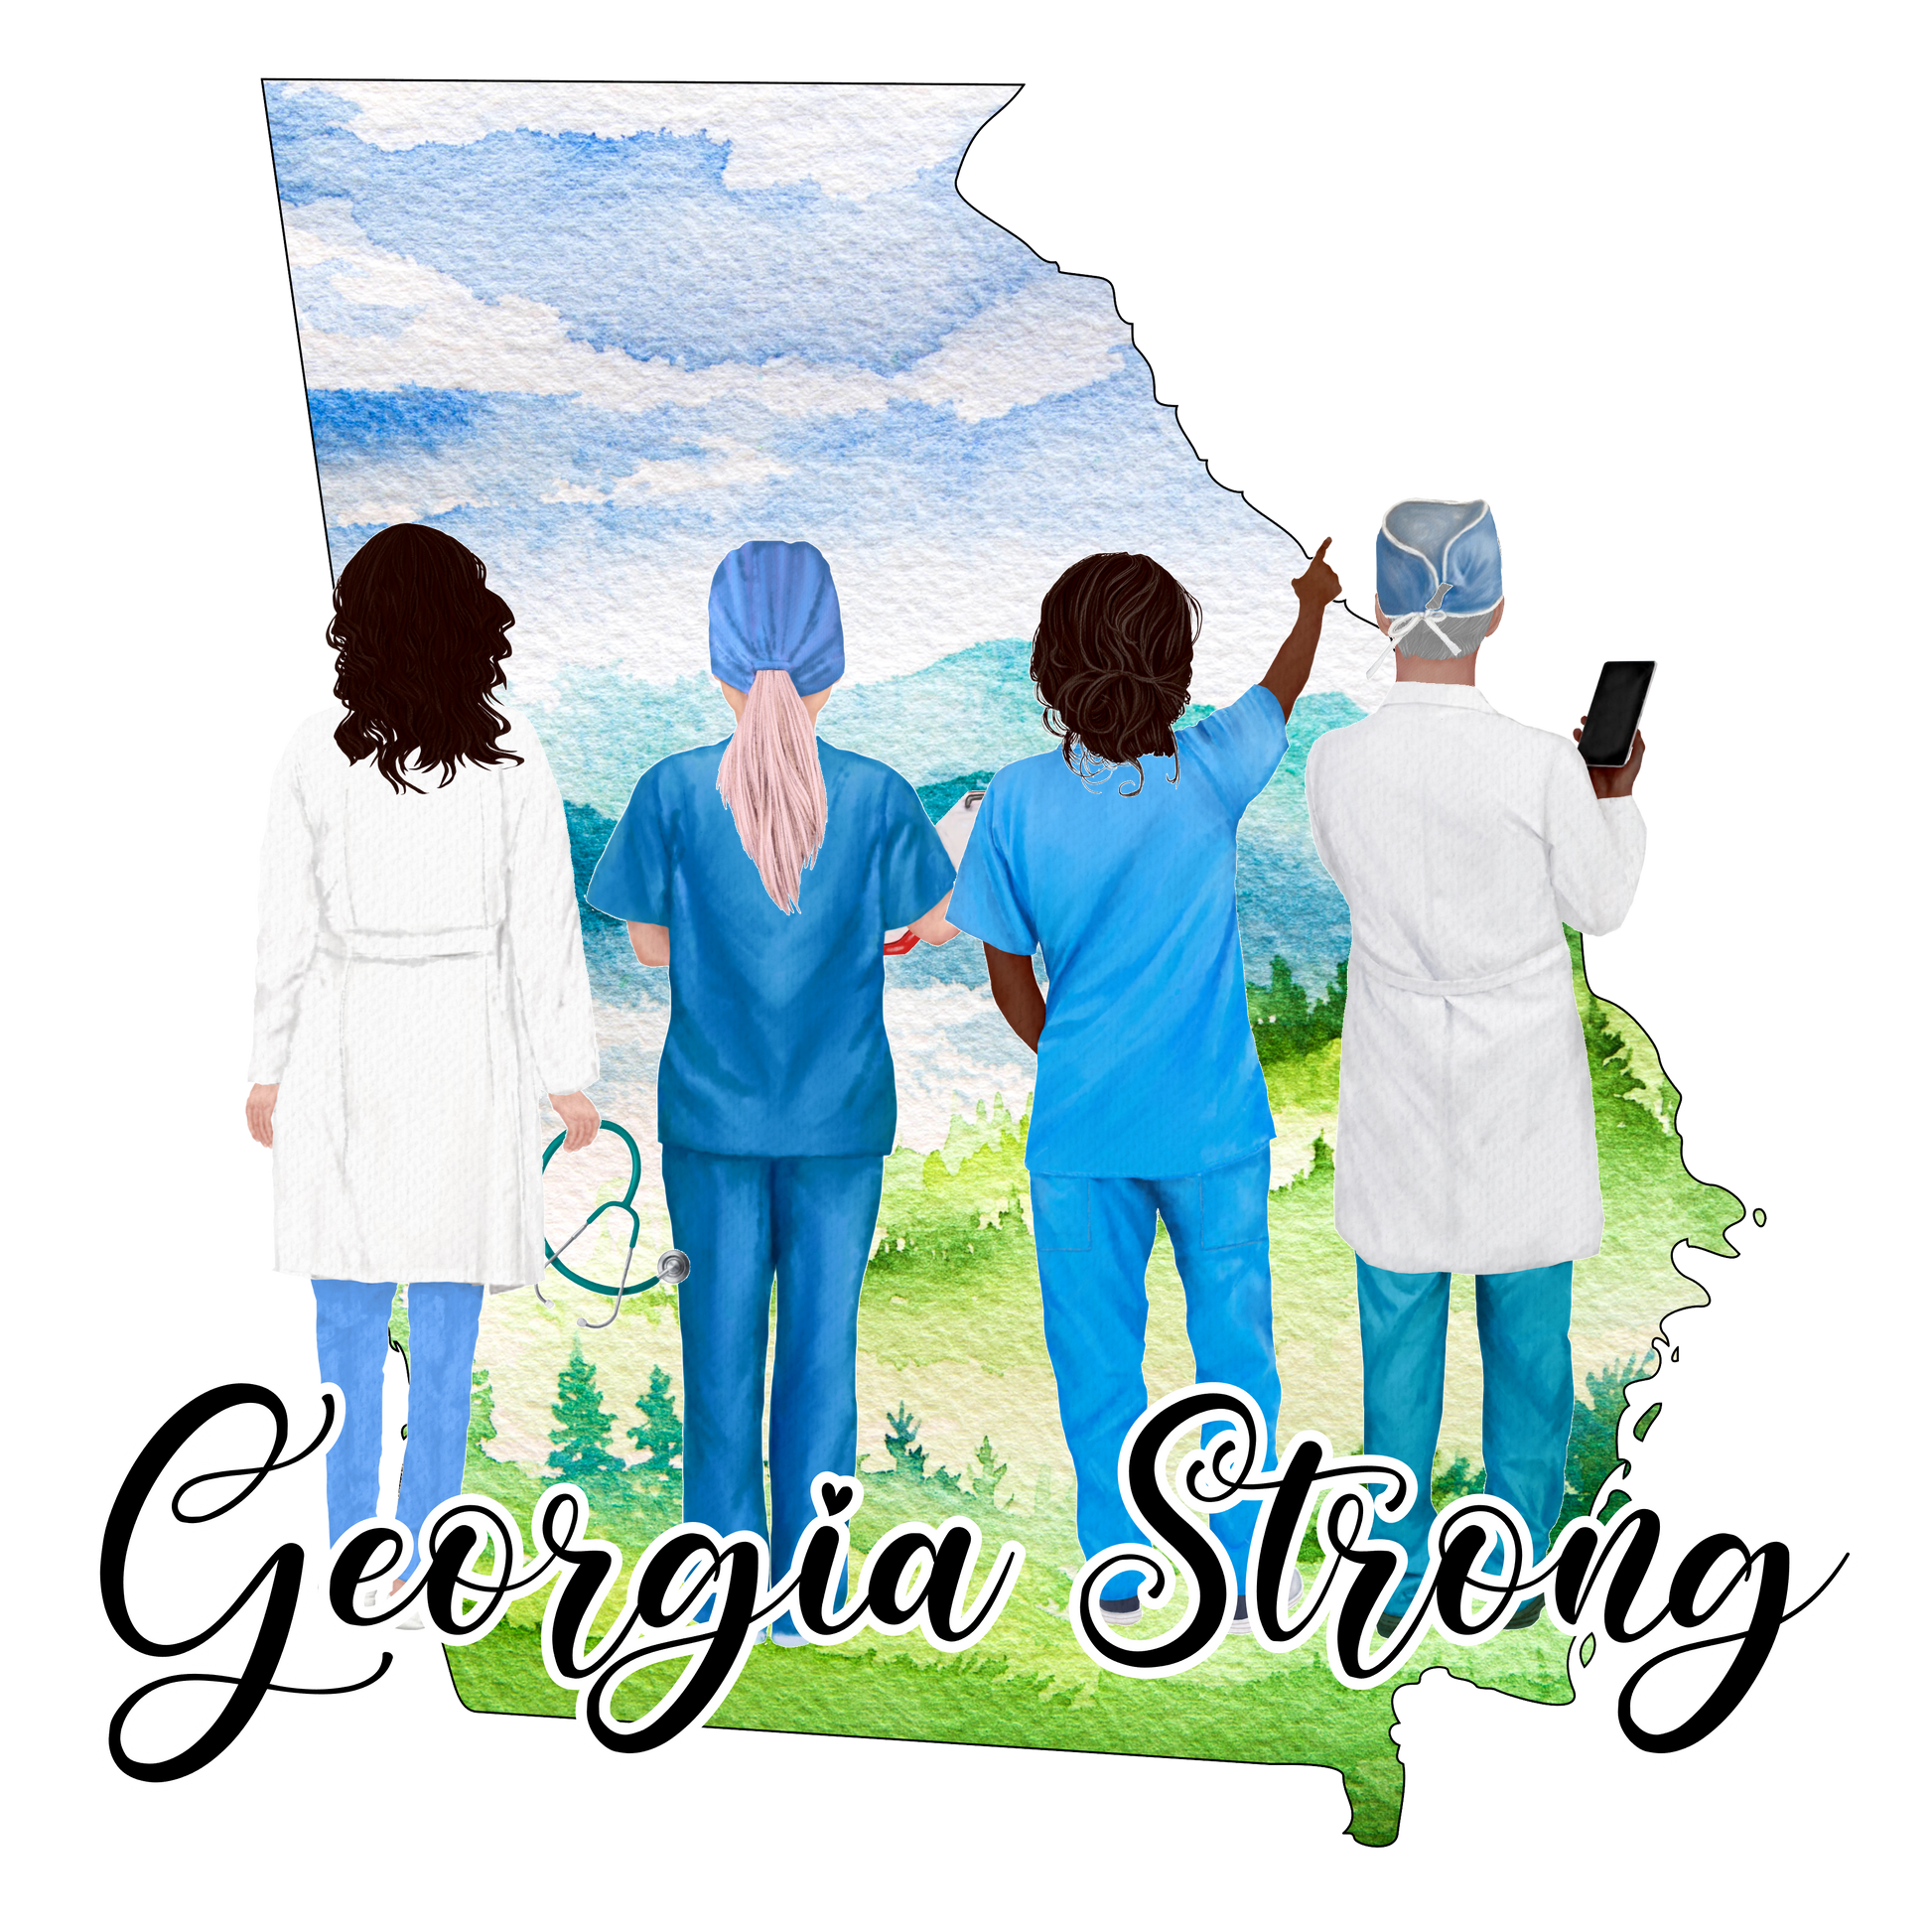 Georgia Strong - Medical - White Short-Sleeve Tee - Southern Grace Creations